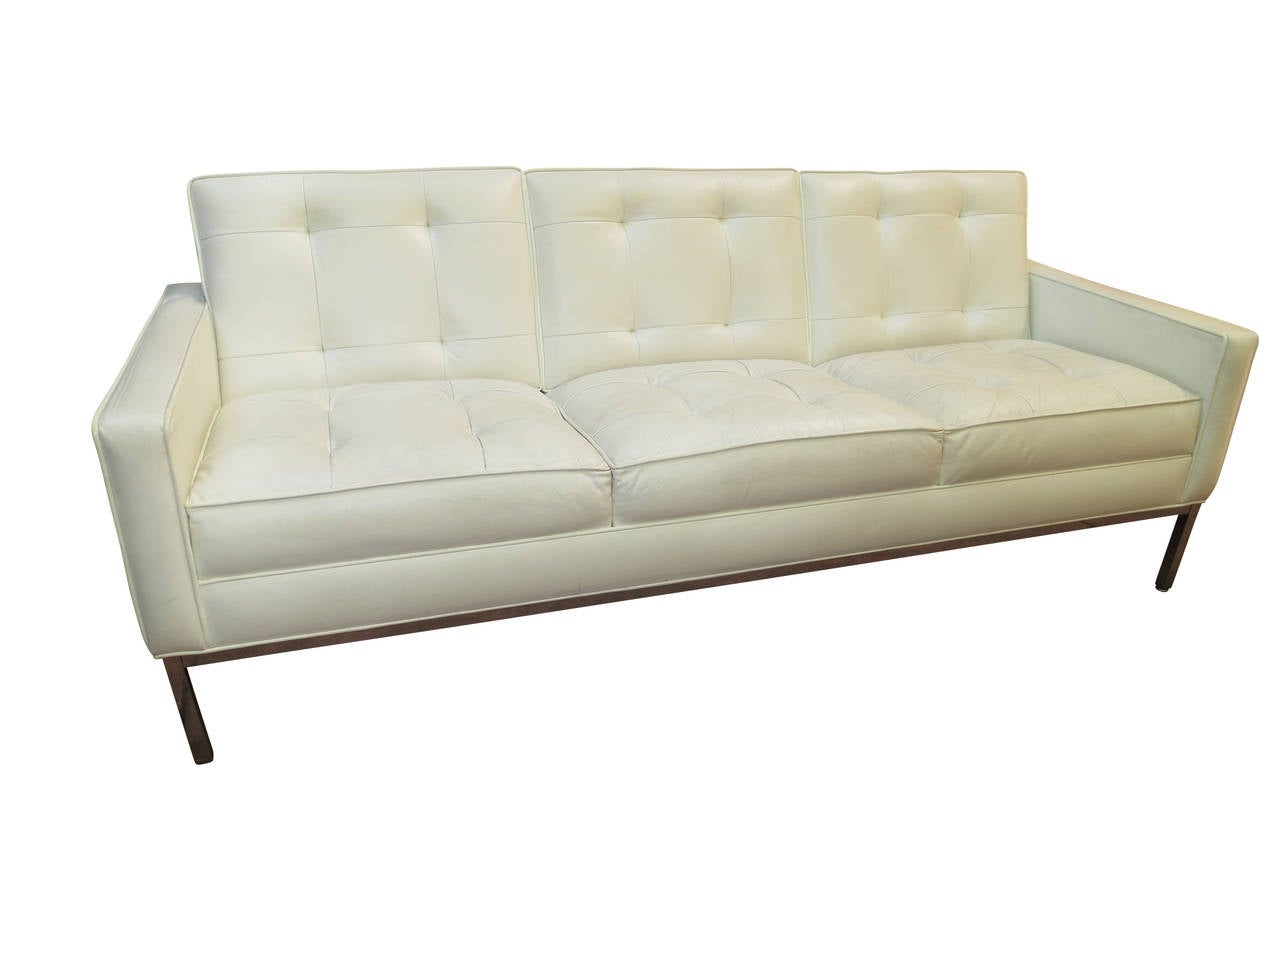 A classic tuxedo style sofa covered in white leather. The legs and surrounding frame are chromed metal. This is one of a pair of these Probber sofas. They are being offered separately.